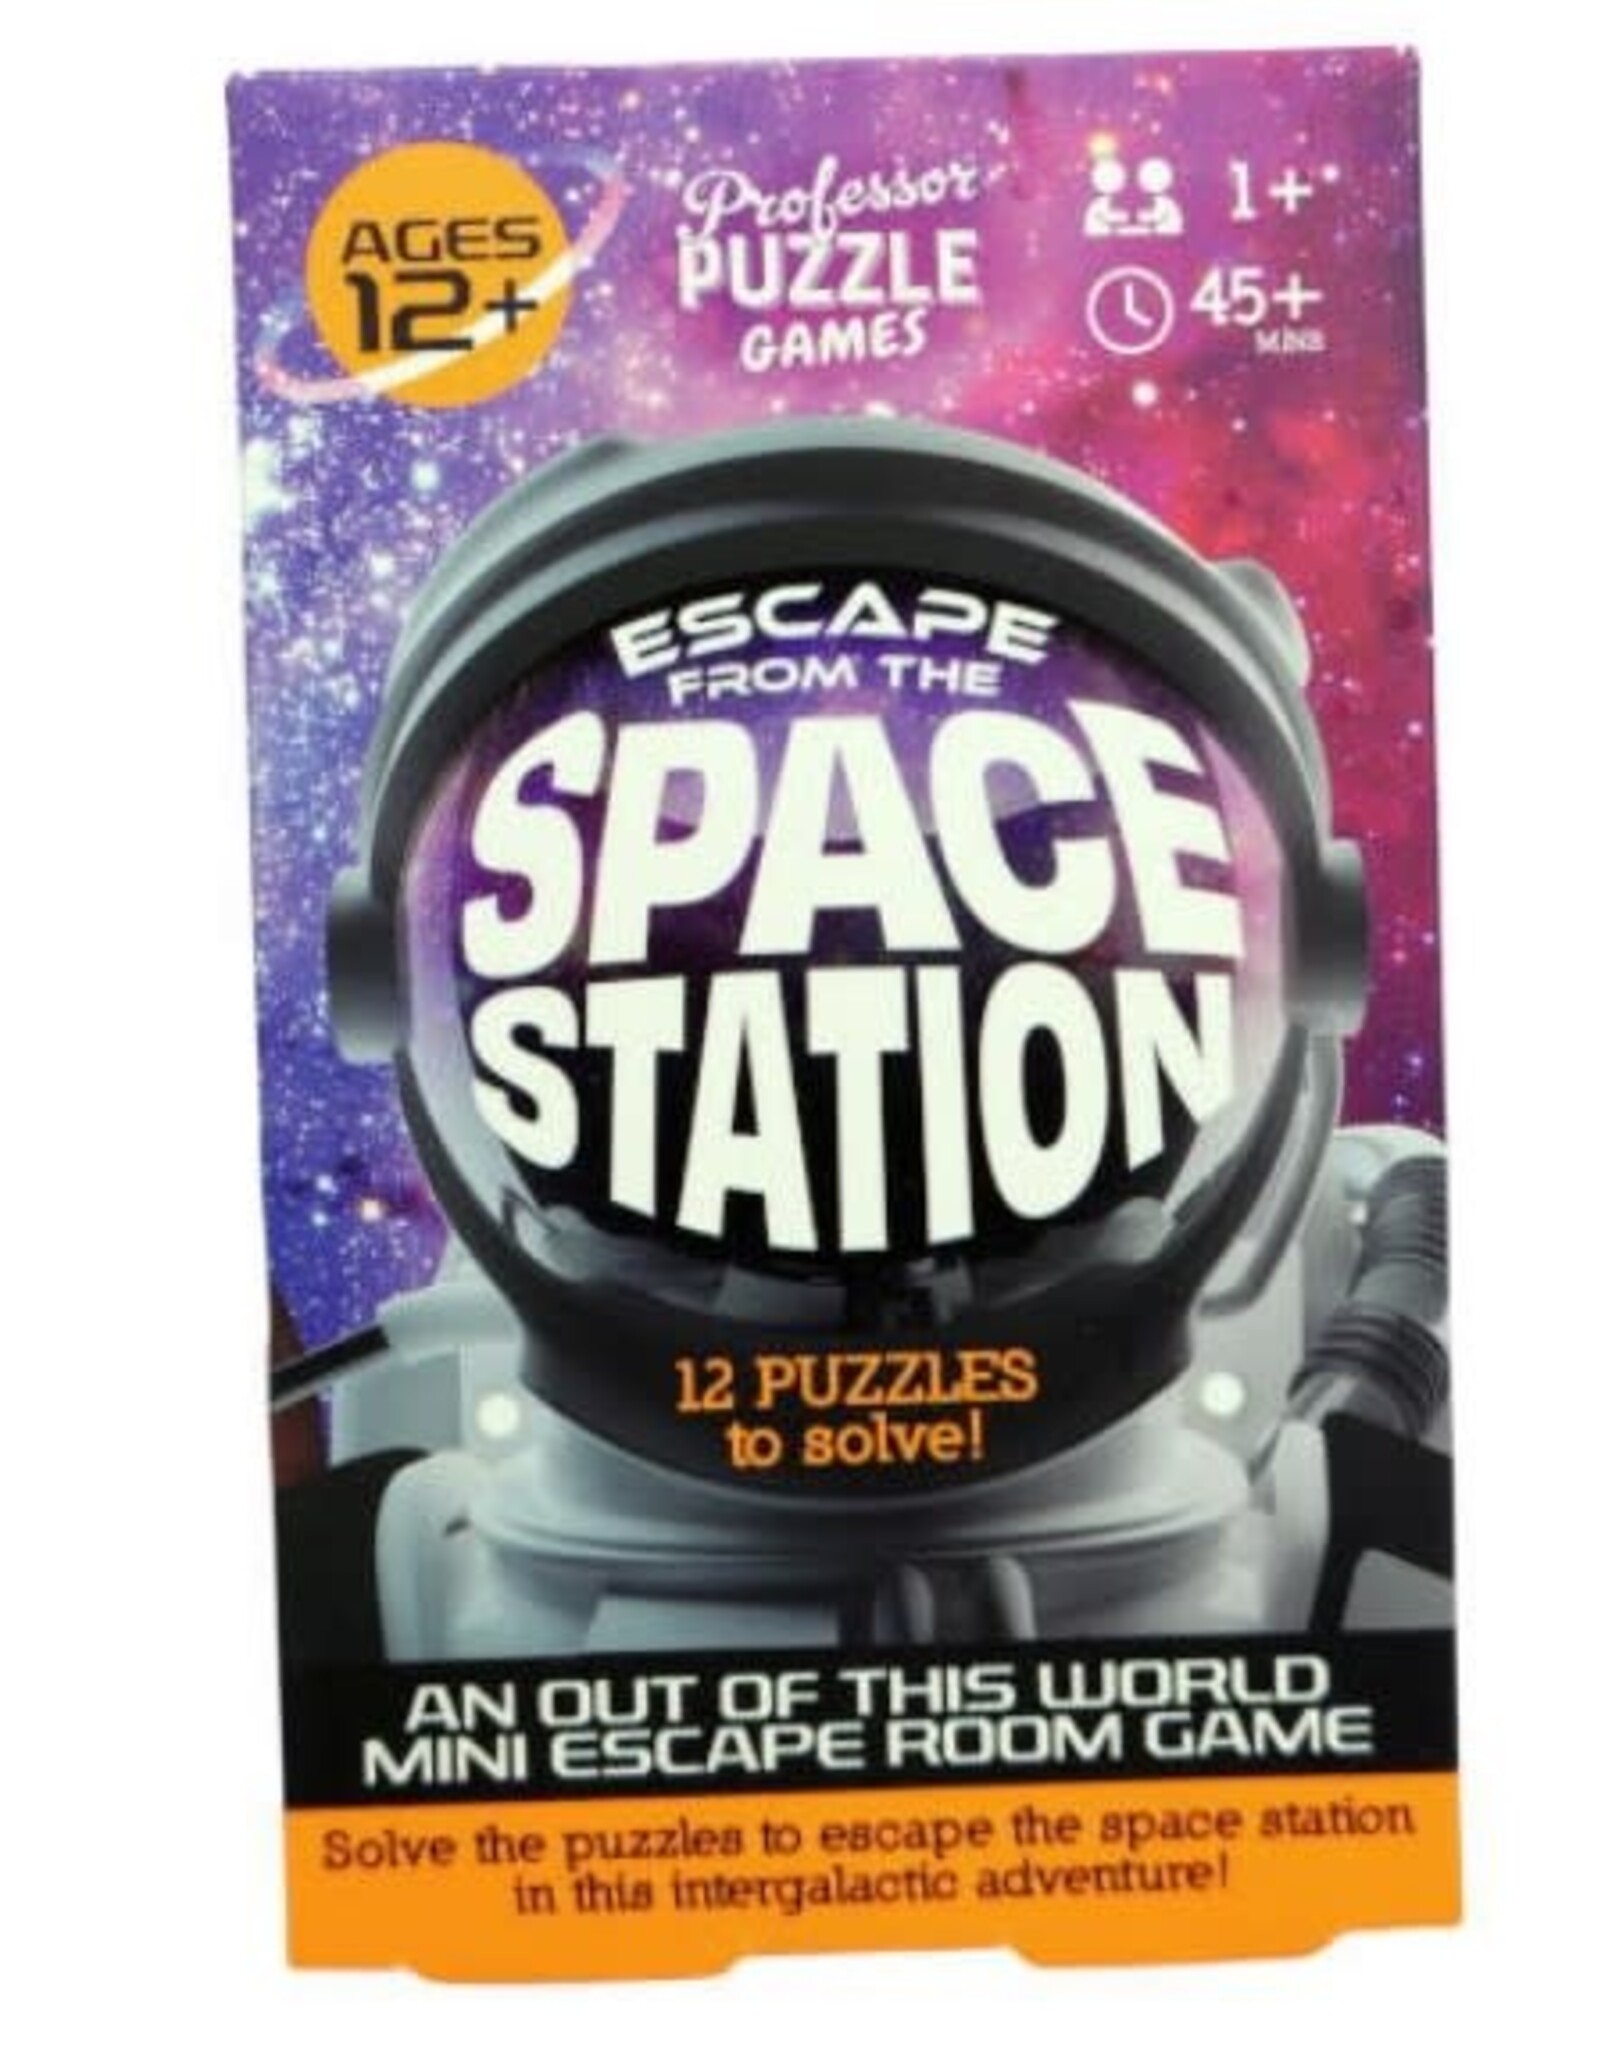 Professor Puzzle MINI ESCAPE FROM THE SPACE STATION GAME